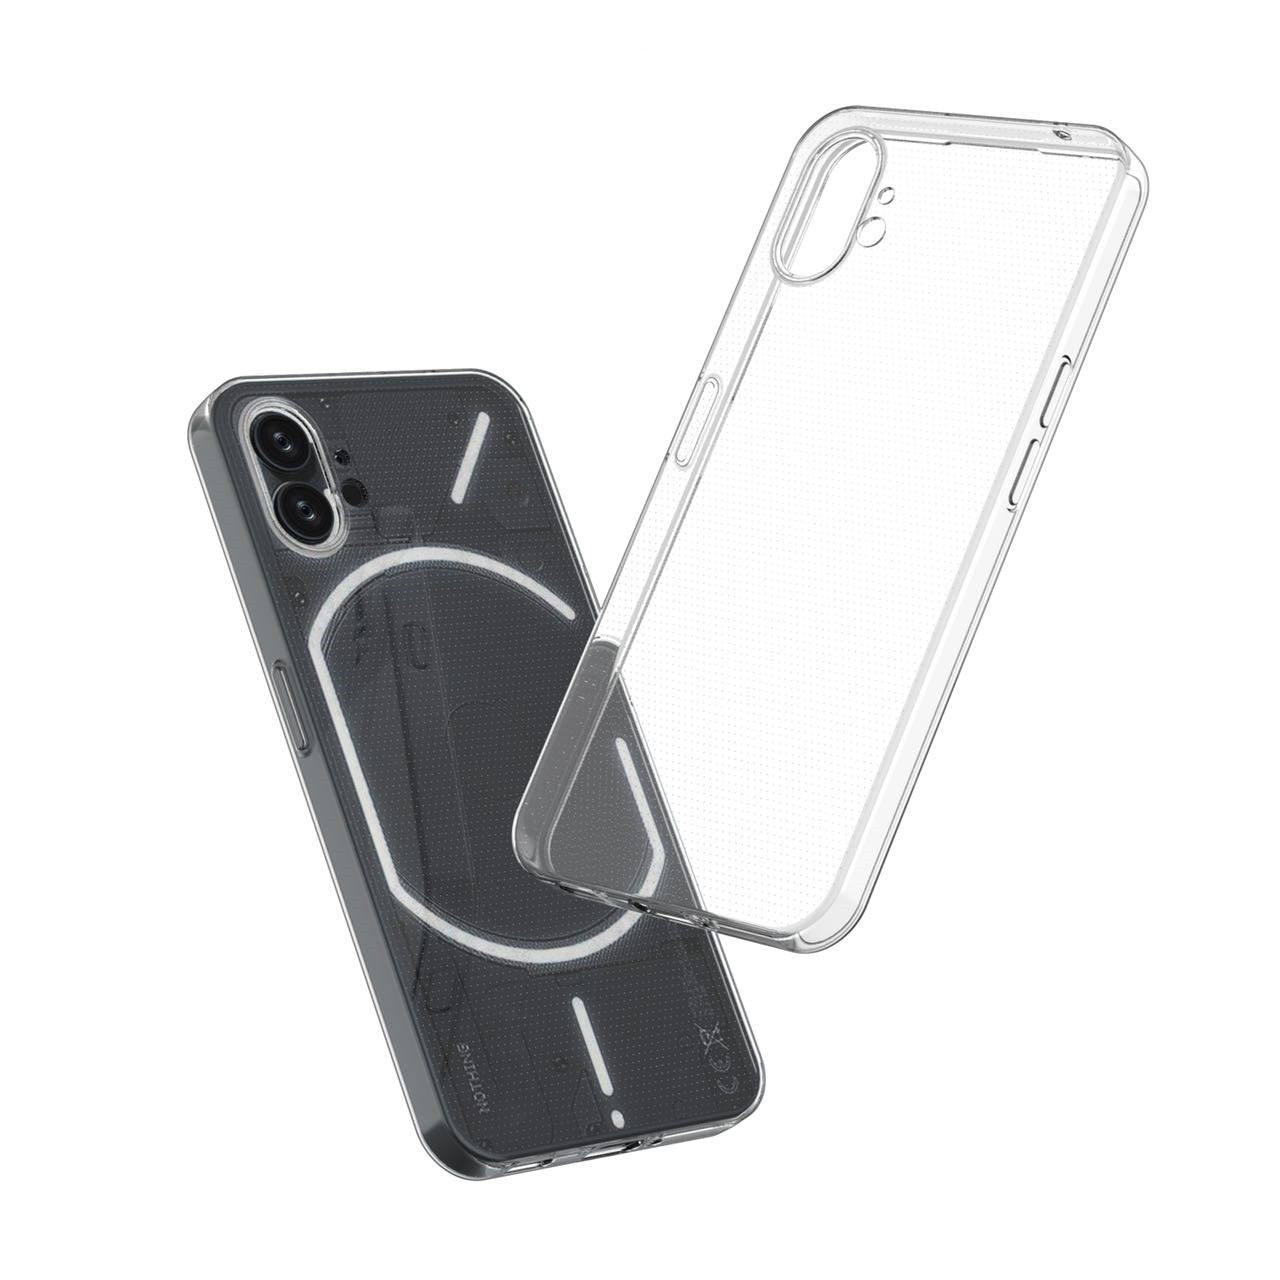 Super Thin Soft TPU Clear Case for Nothing Phone 1 2 phone2 Anti-Drop Cell Phone Bag Cover for Nothing Phone1 Cases